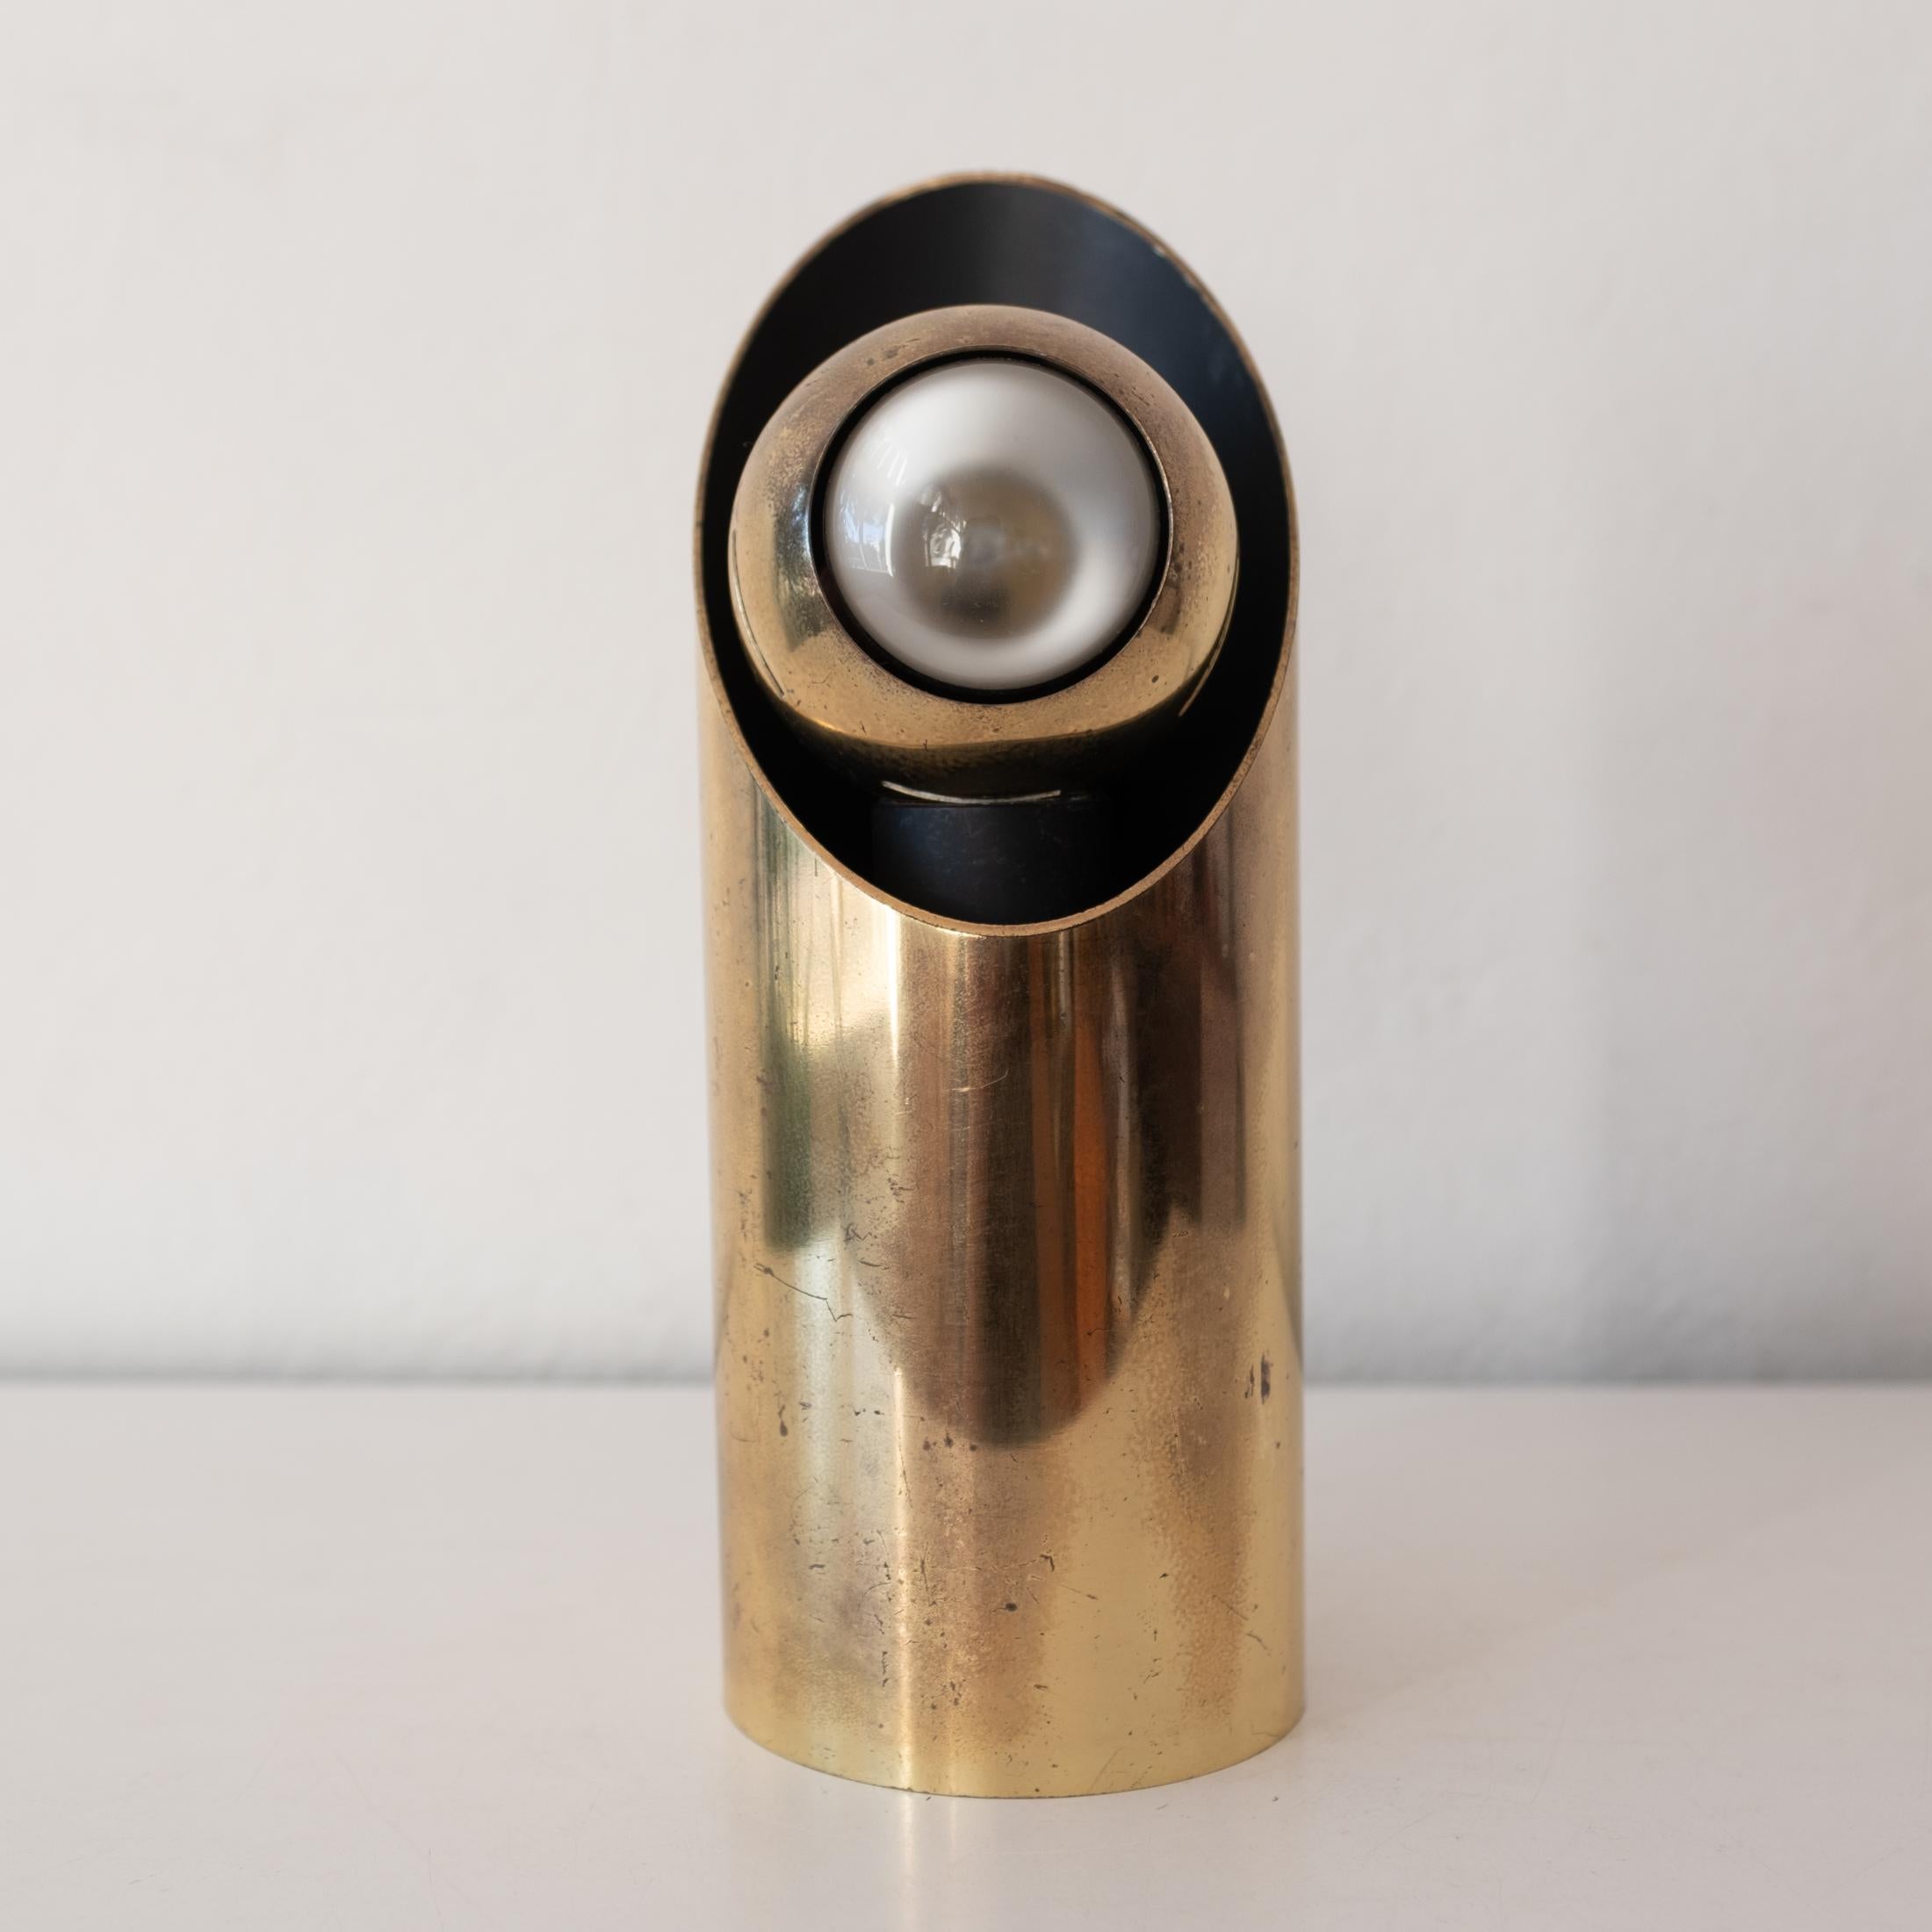 Solid brass eyeball spotlight lamp by Angelo Lelli for Arredoluce. Magnetic mount allows the eyeball spotlight to be rotated. Substantial heavy build. Dimmer switch and wired for US. Great original patina. 